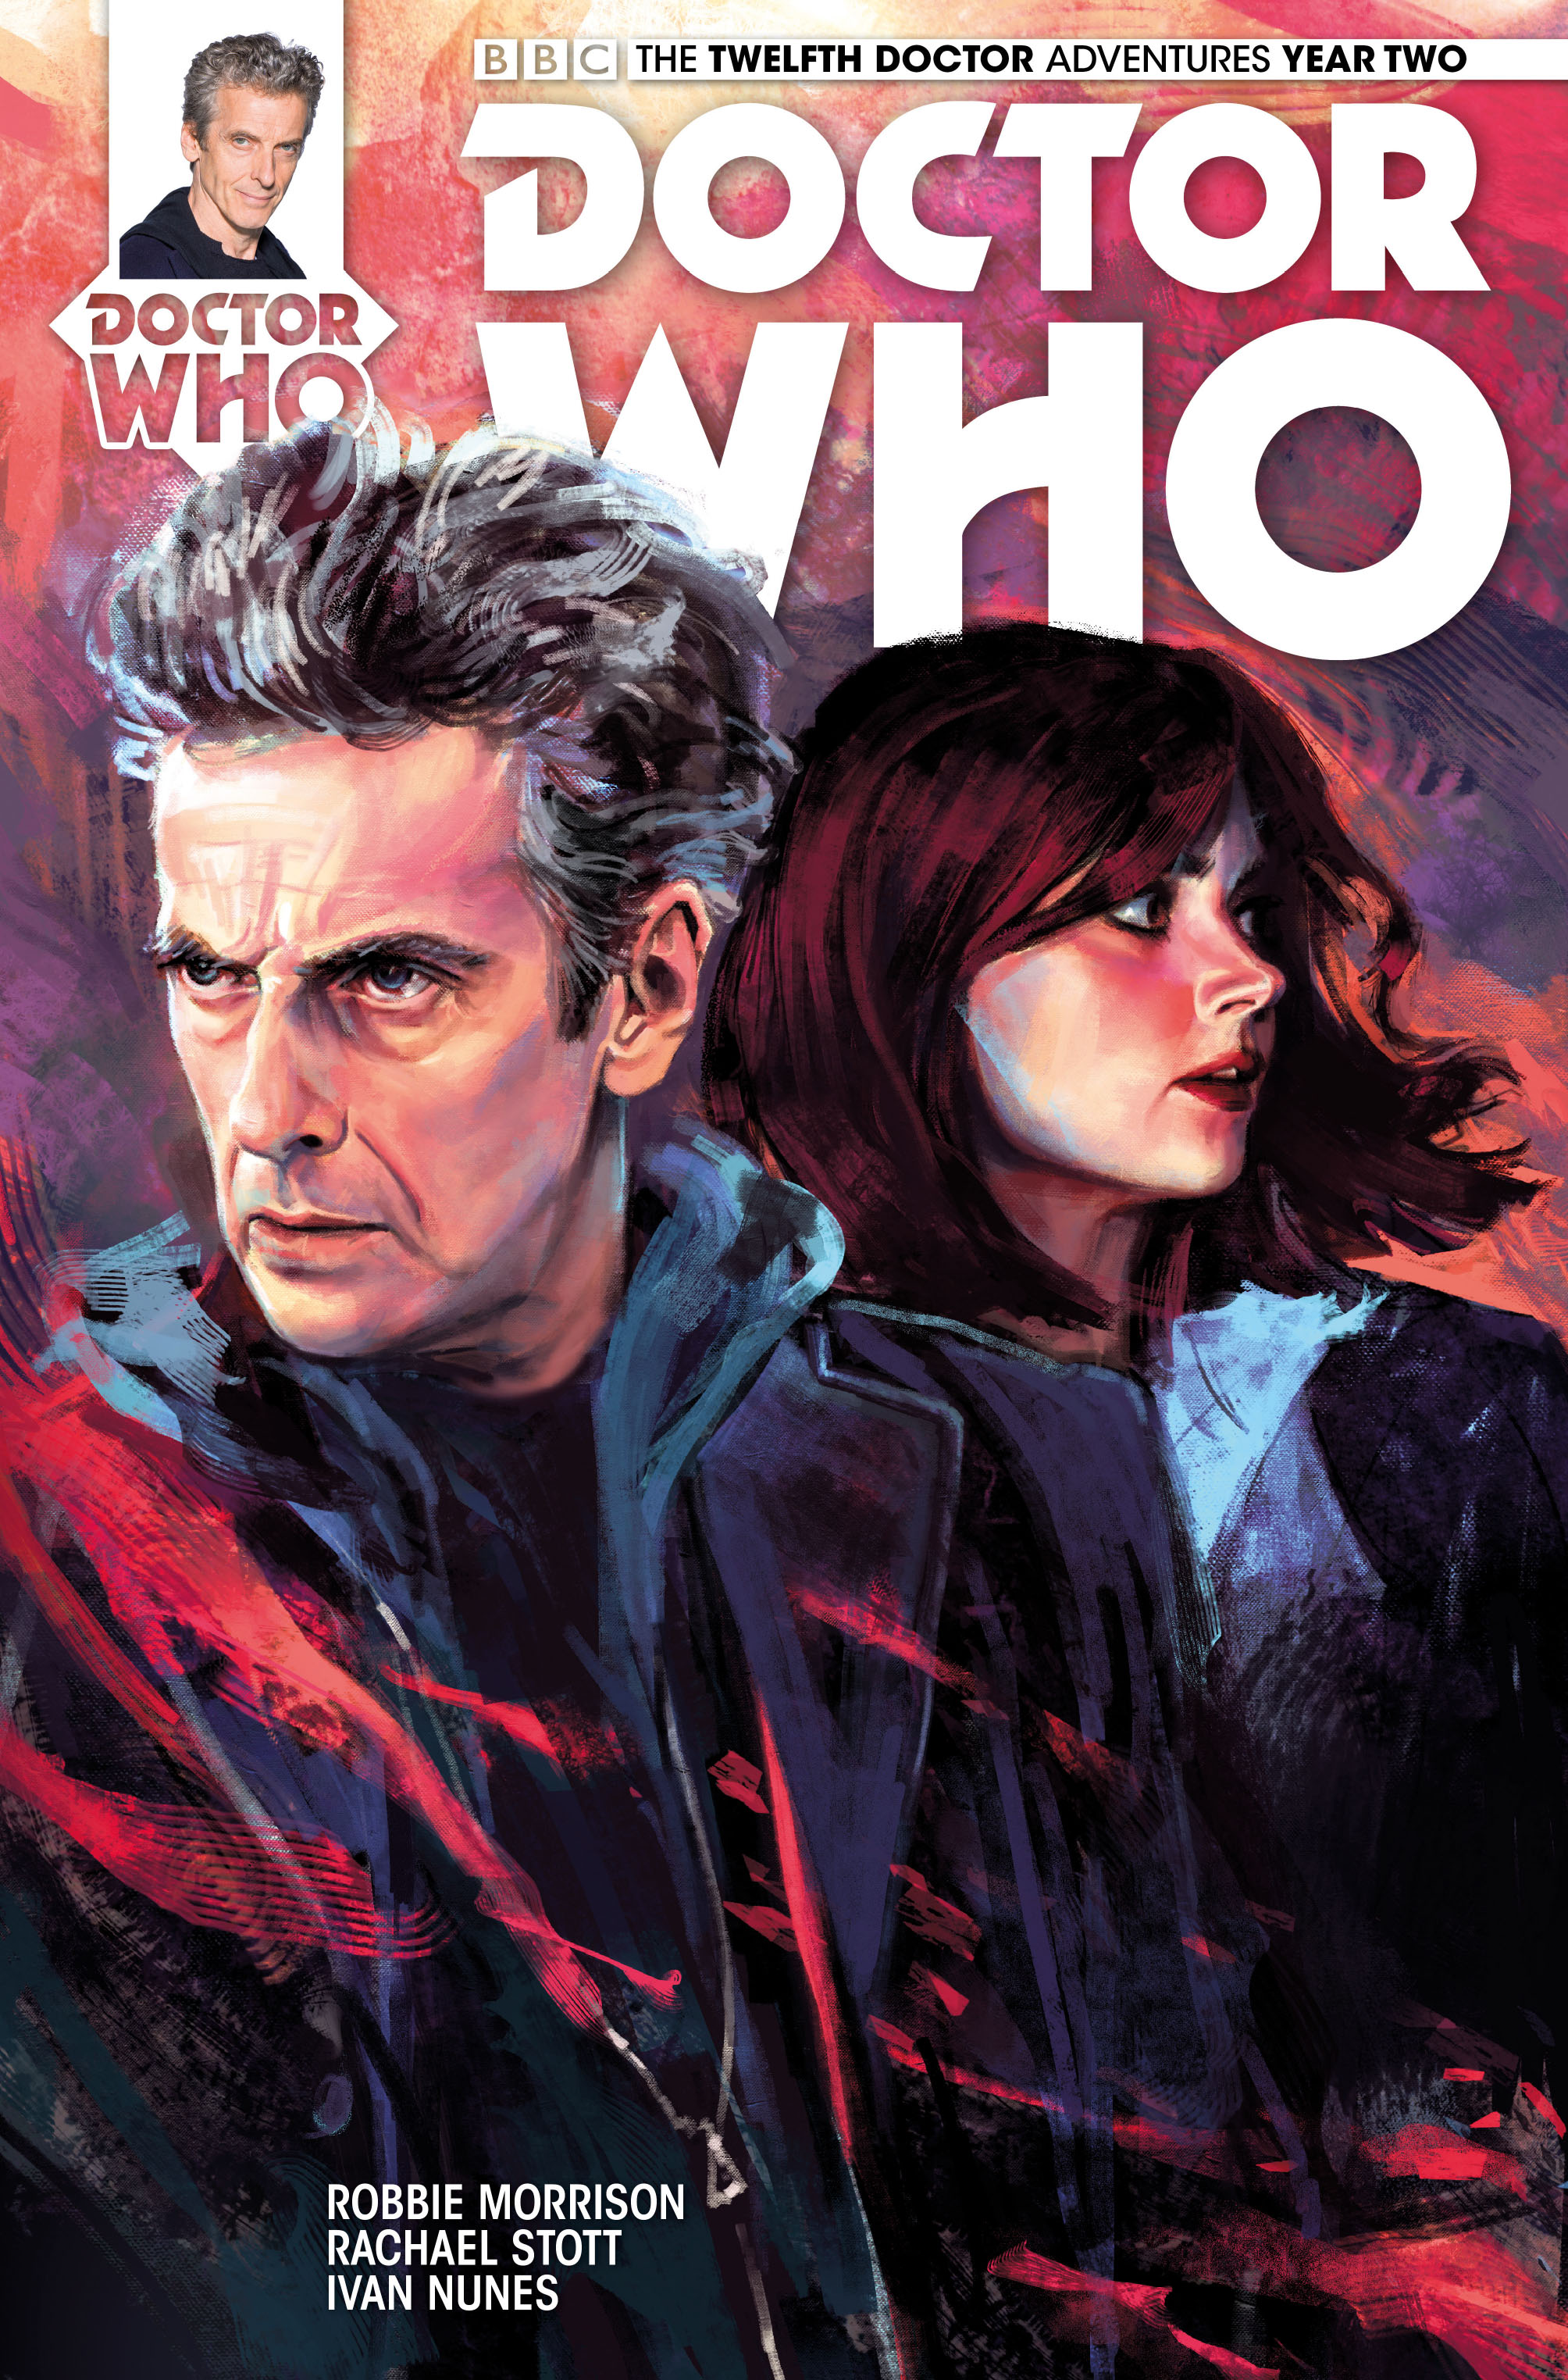 Doctor Who: The Twelfth Doctor - Year Two #1 Cover